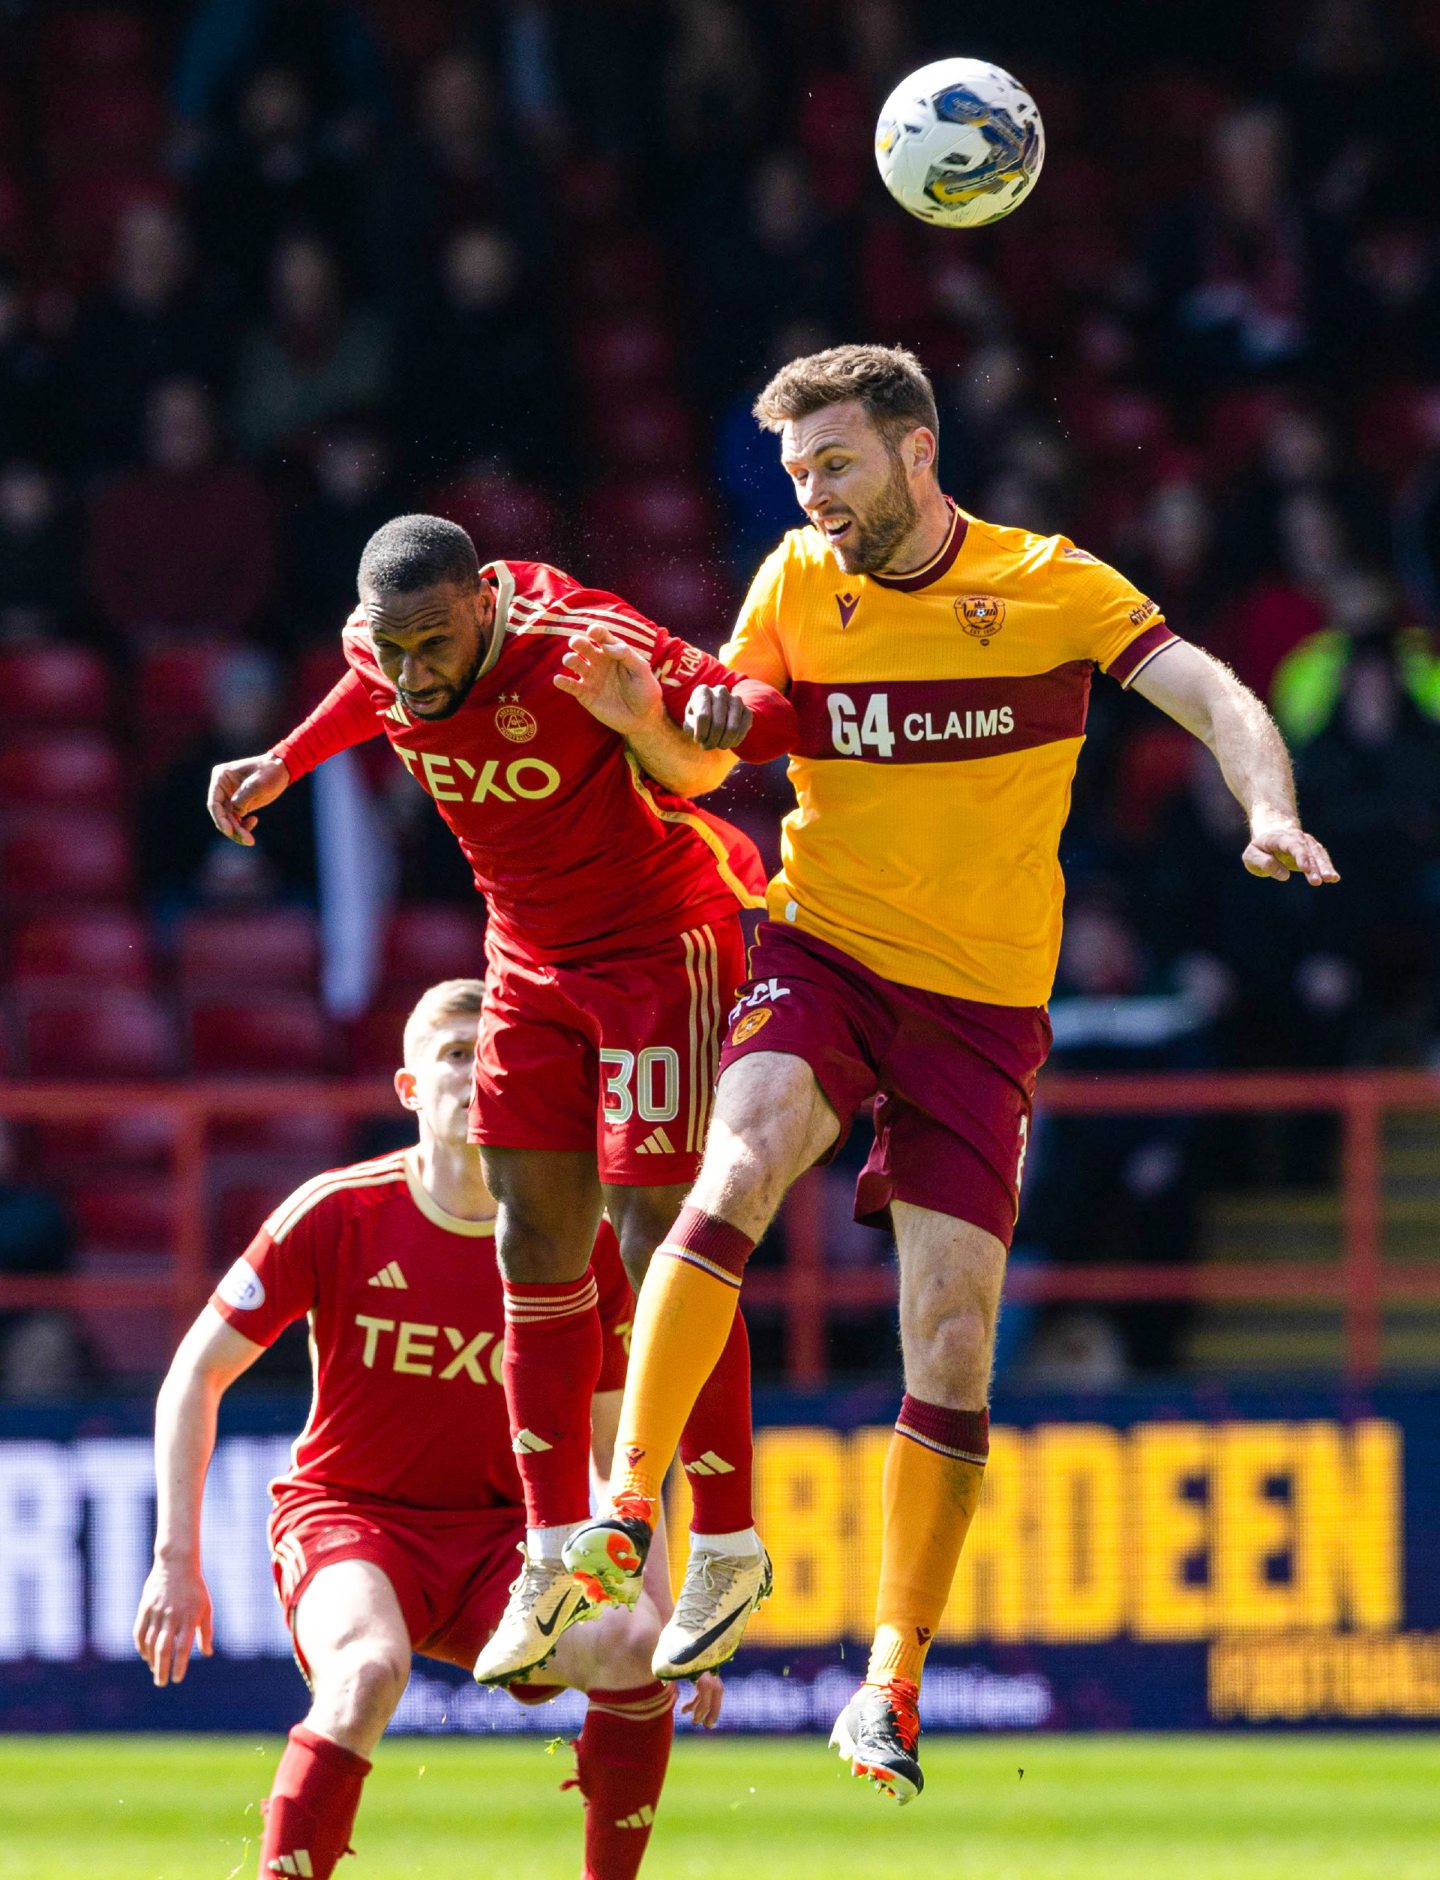 Aberdeen's Junior Hoilett and Motherwell's Stephen O'Donnell in action at Pittodrie. Image: SNS 